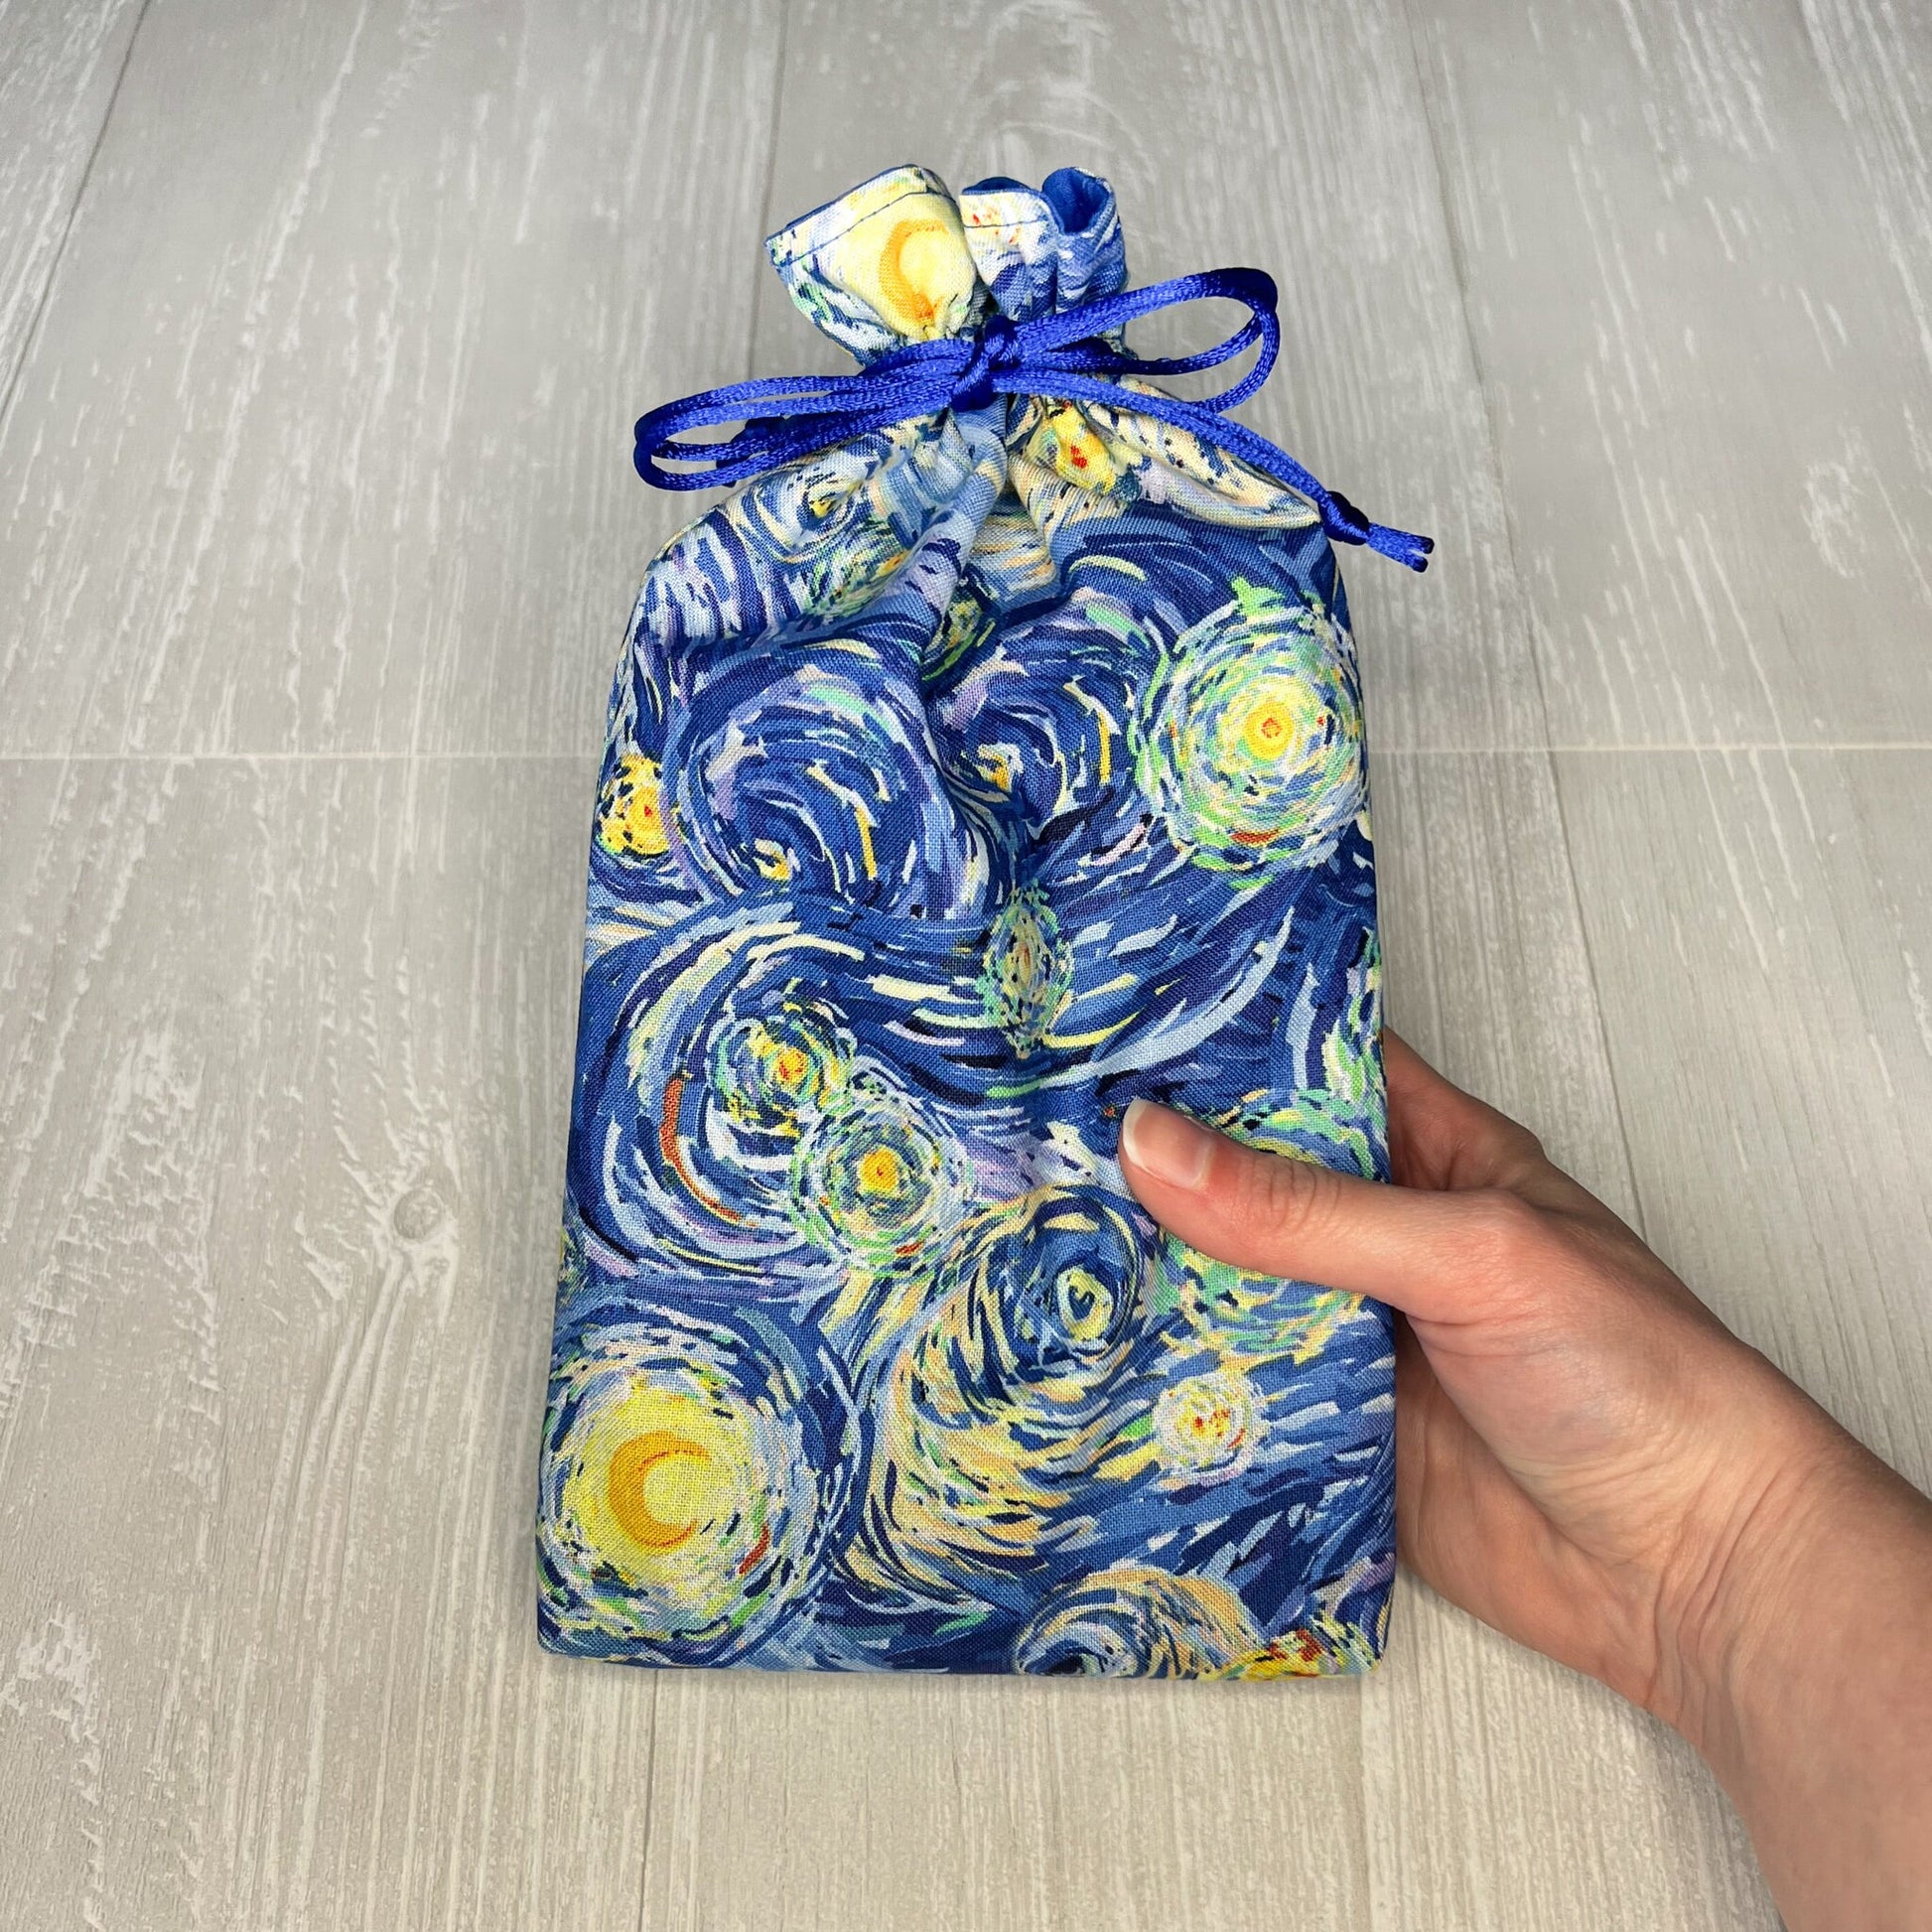 Large Starry Night Tarot Deck Bag, Blue Oracle Card Drawstring Pouch, Deck Storage Holder, Pagan Witchcraft Divination Tool Gifts & Supplies